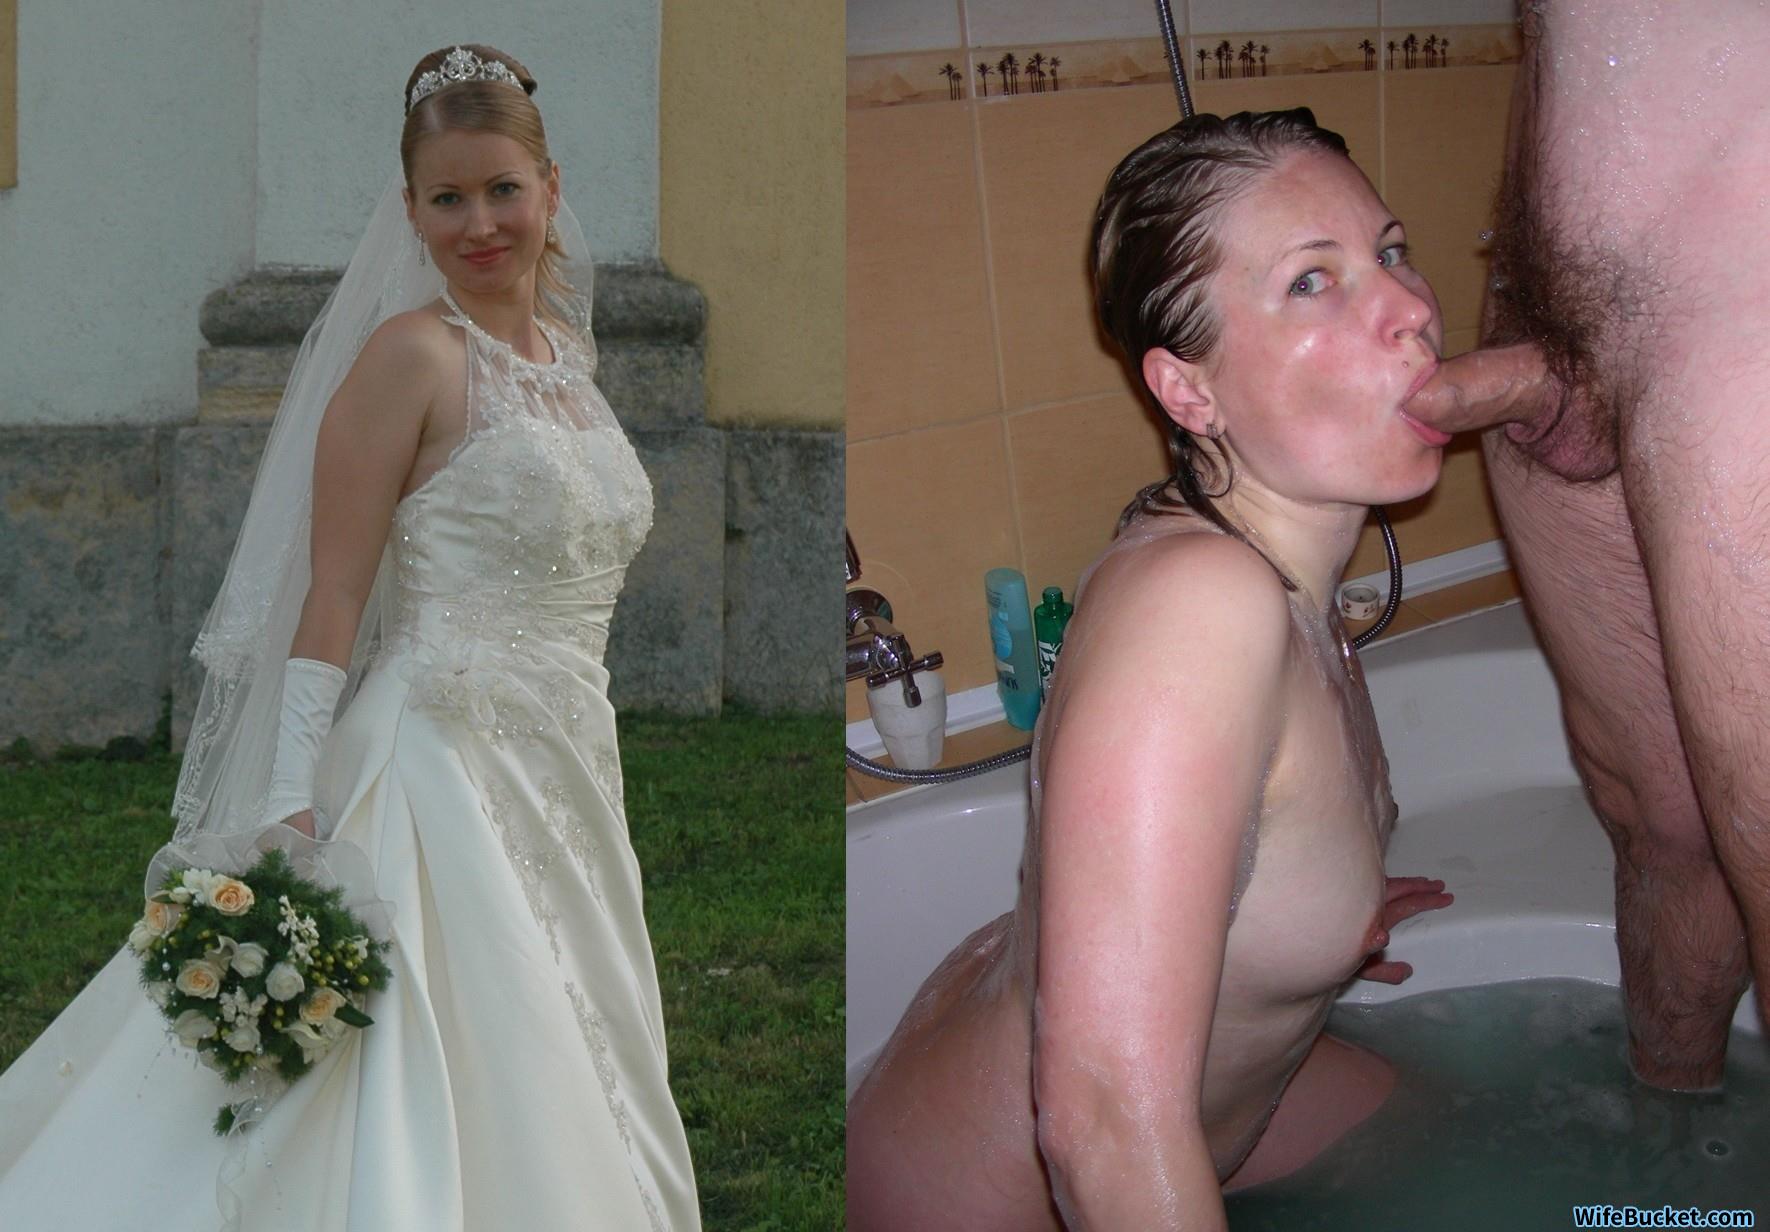 Before-after nudes of sexy amateur brides! Some home porn, too :-) â€“  WifeBucket | Offical MILF Blog